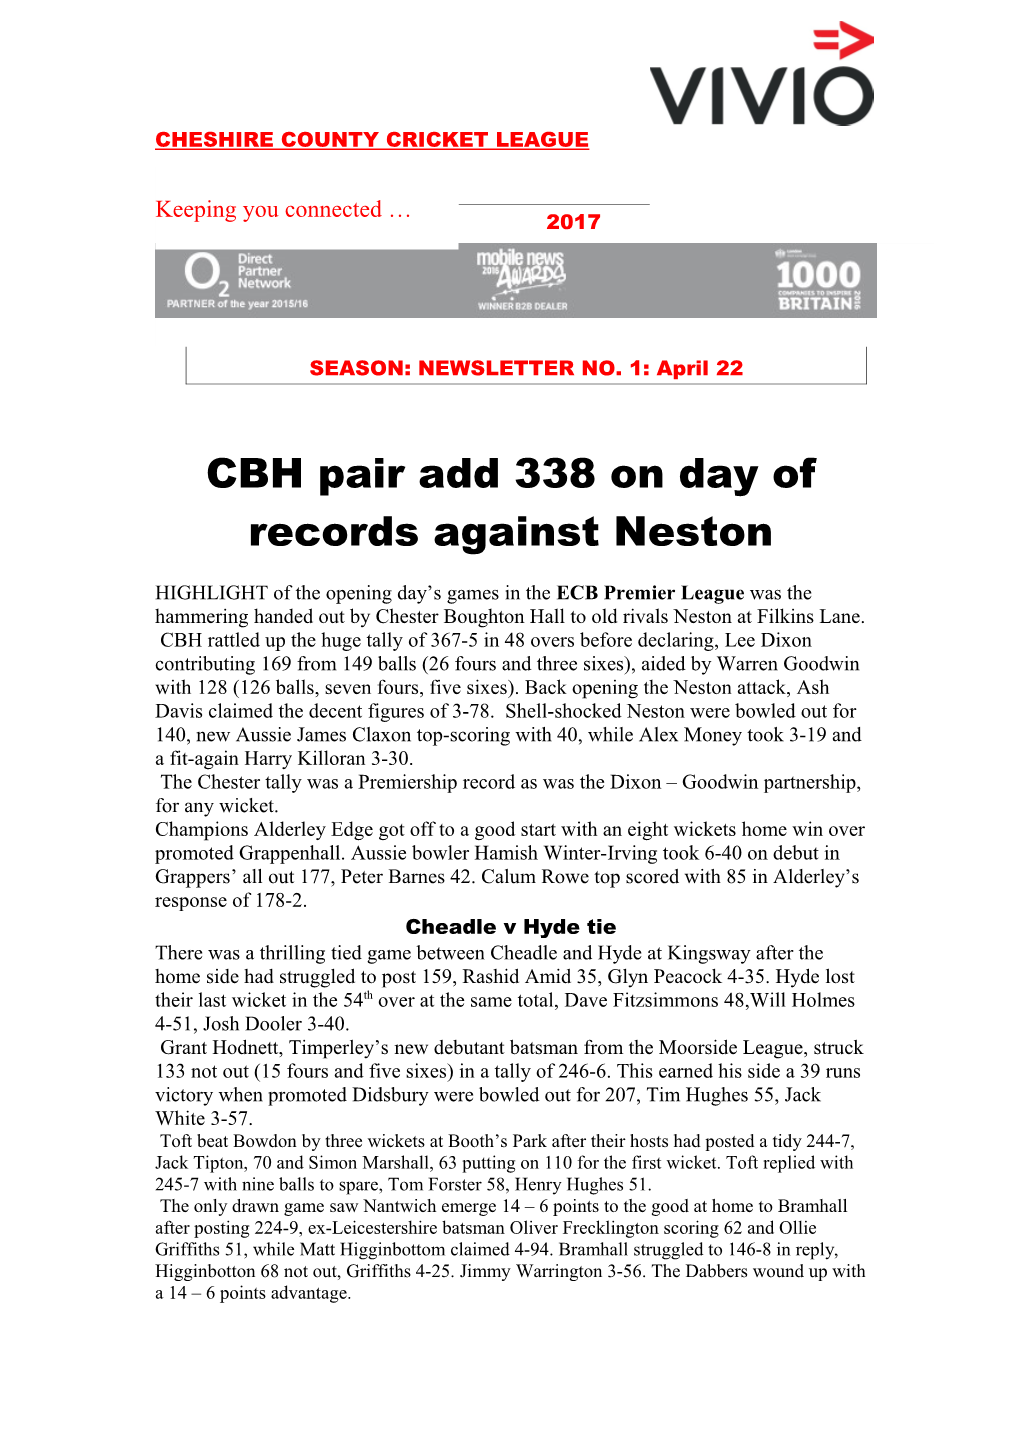 CBH Pair Add 338 on Day of Records Against Neston